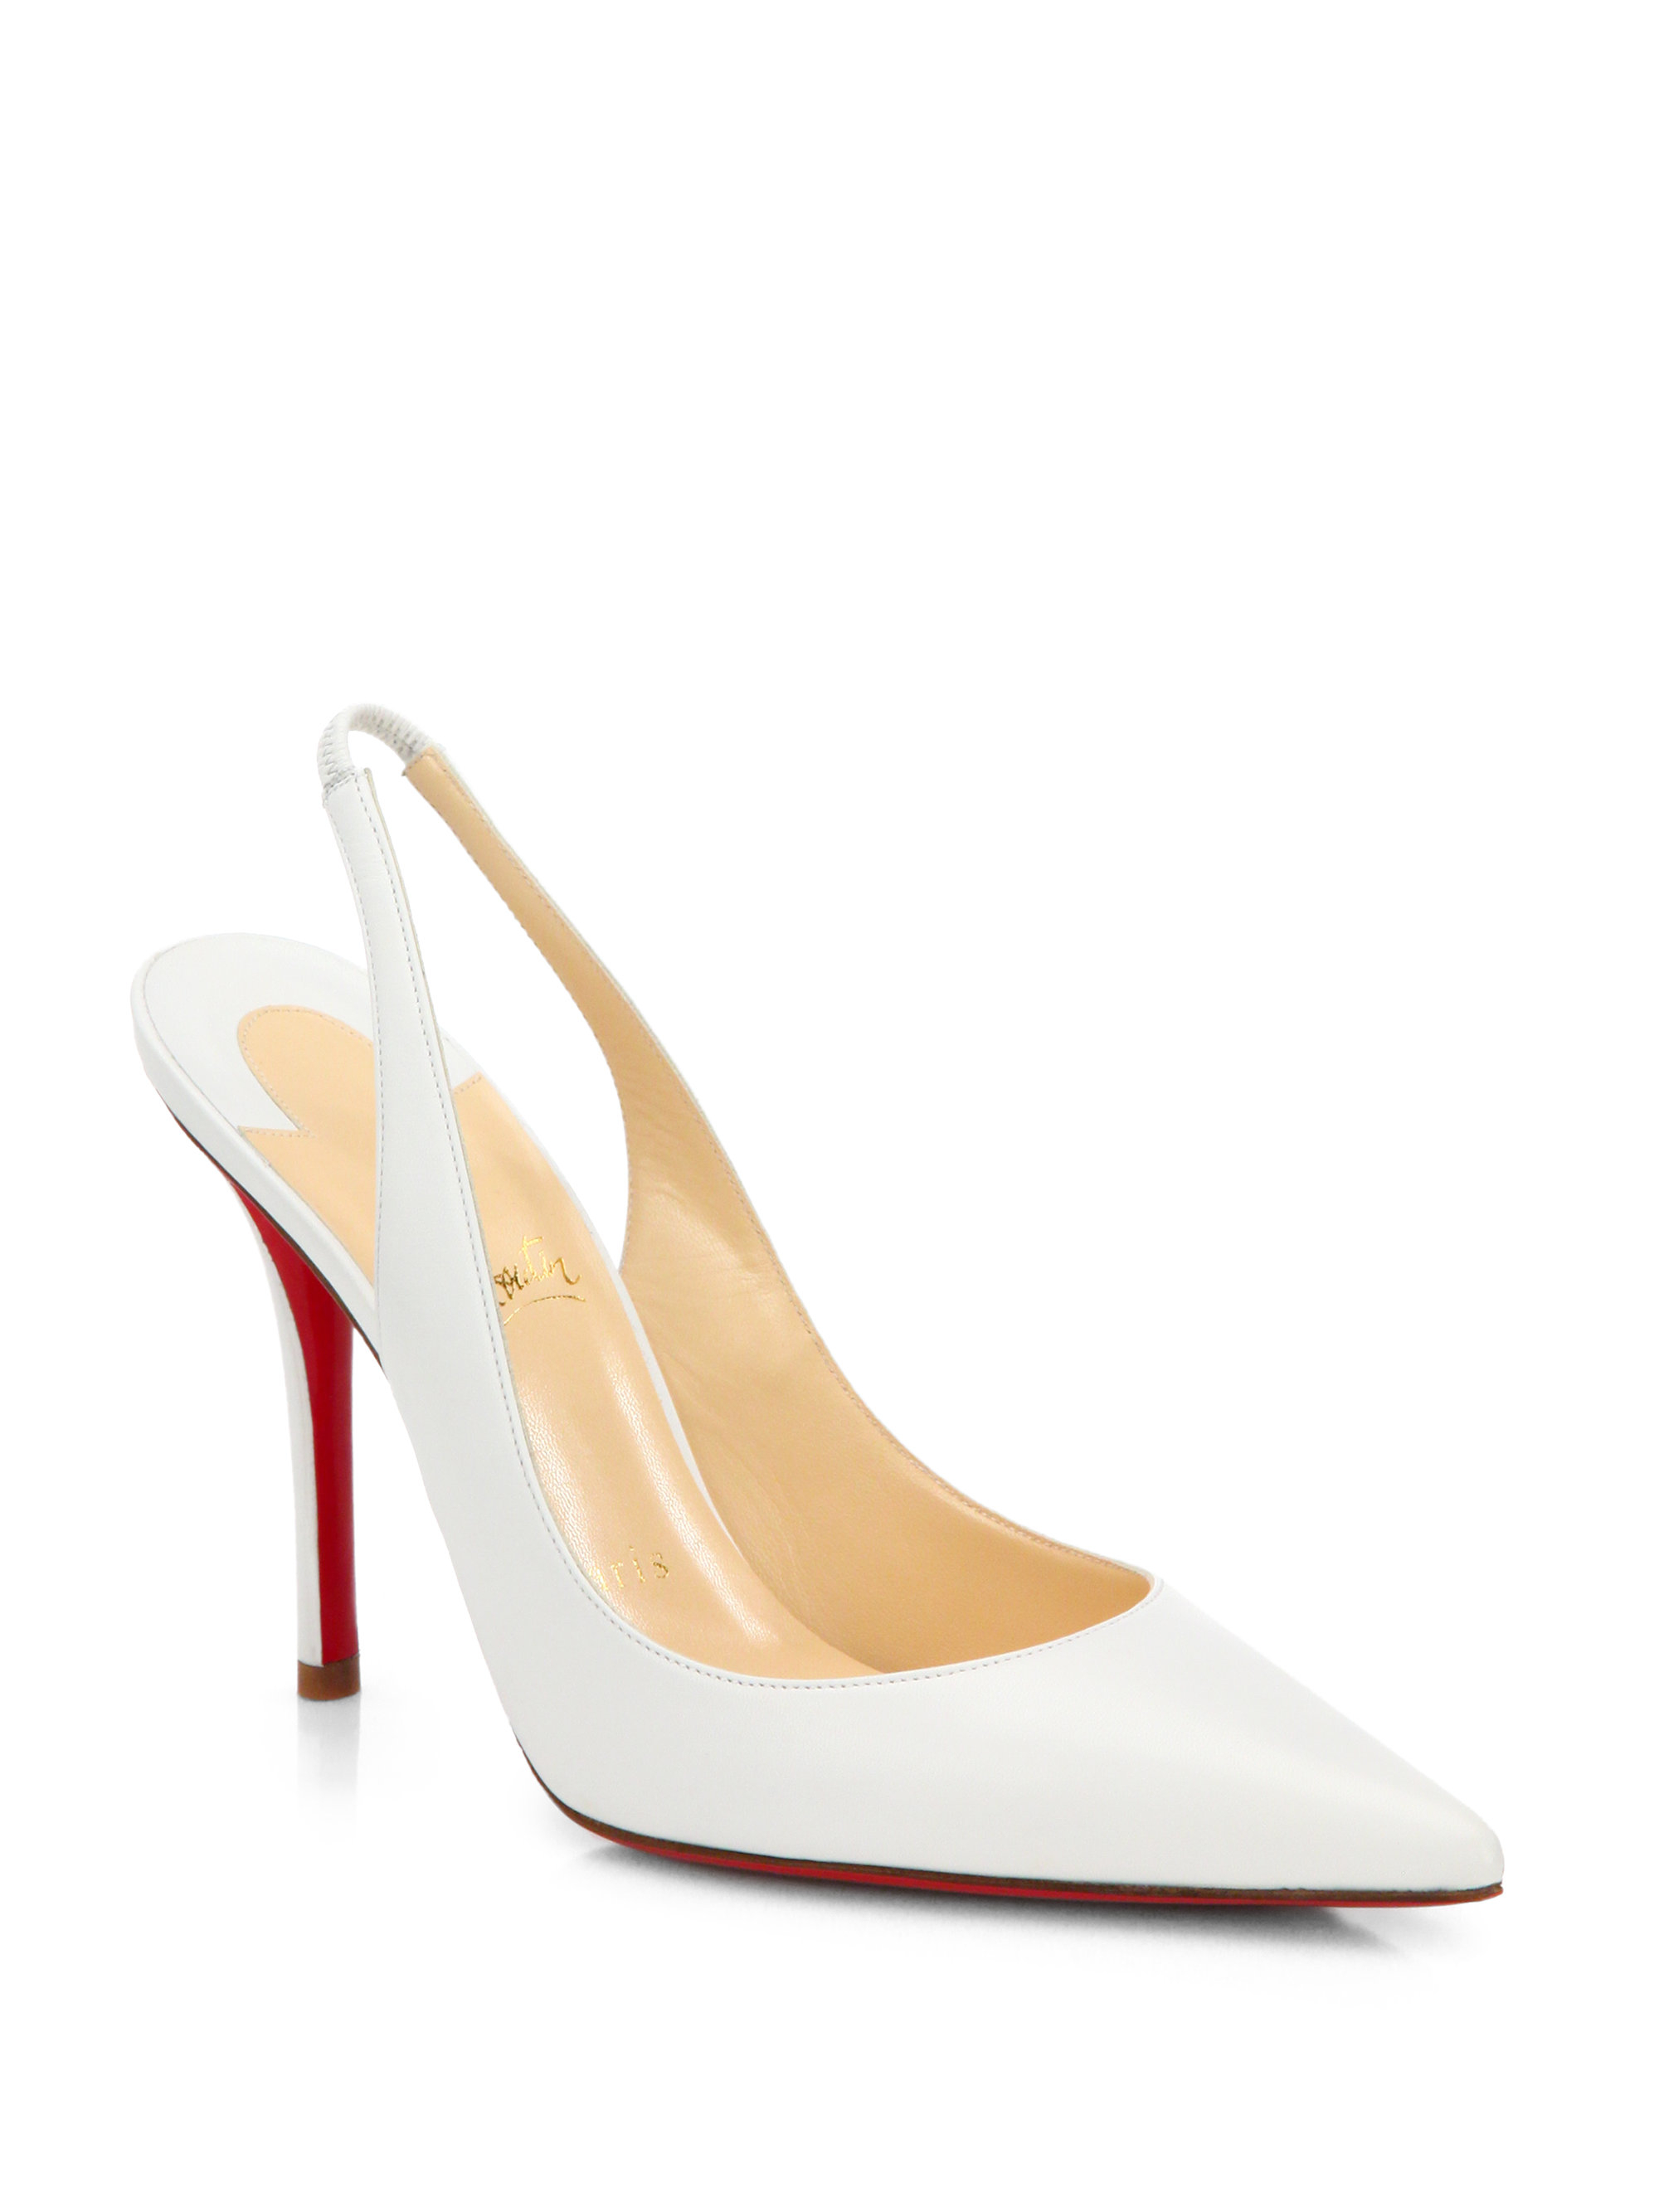 Christian louboutin Apostrophy Kid Leather Slingback Pumps in White | Lyst